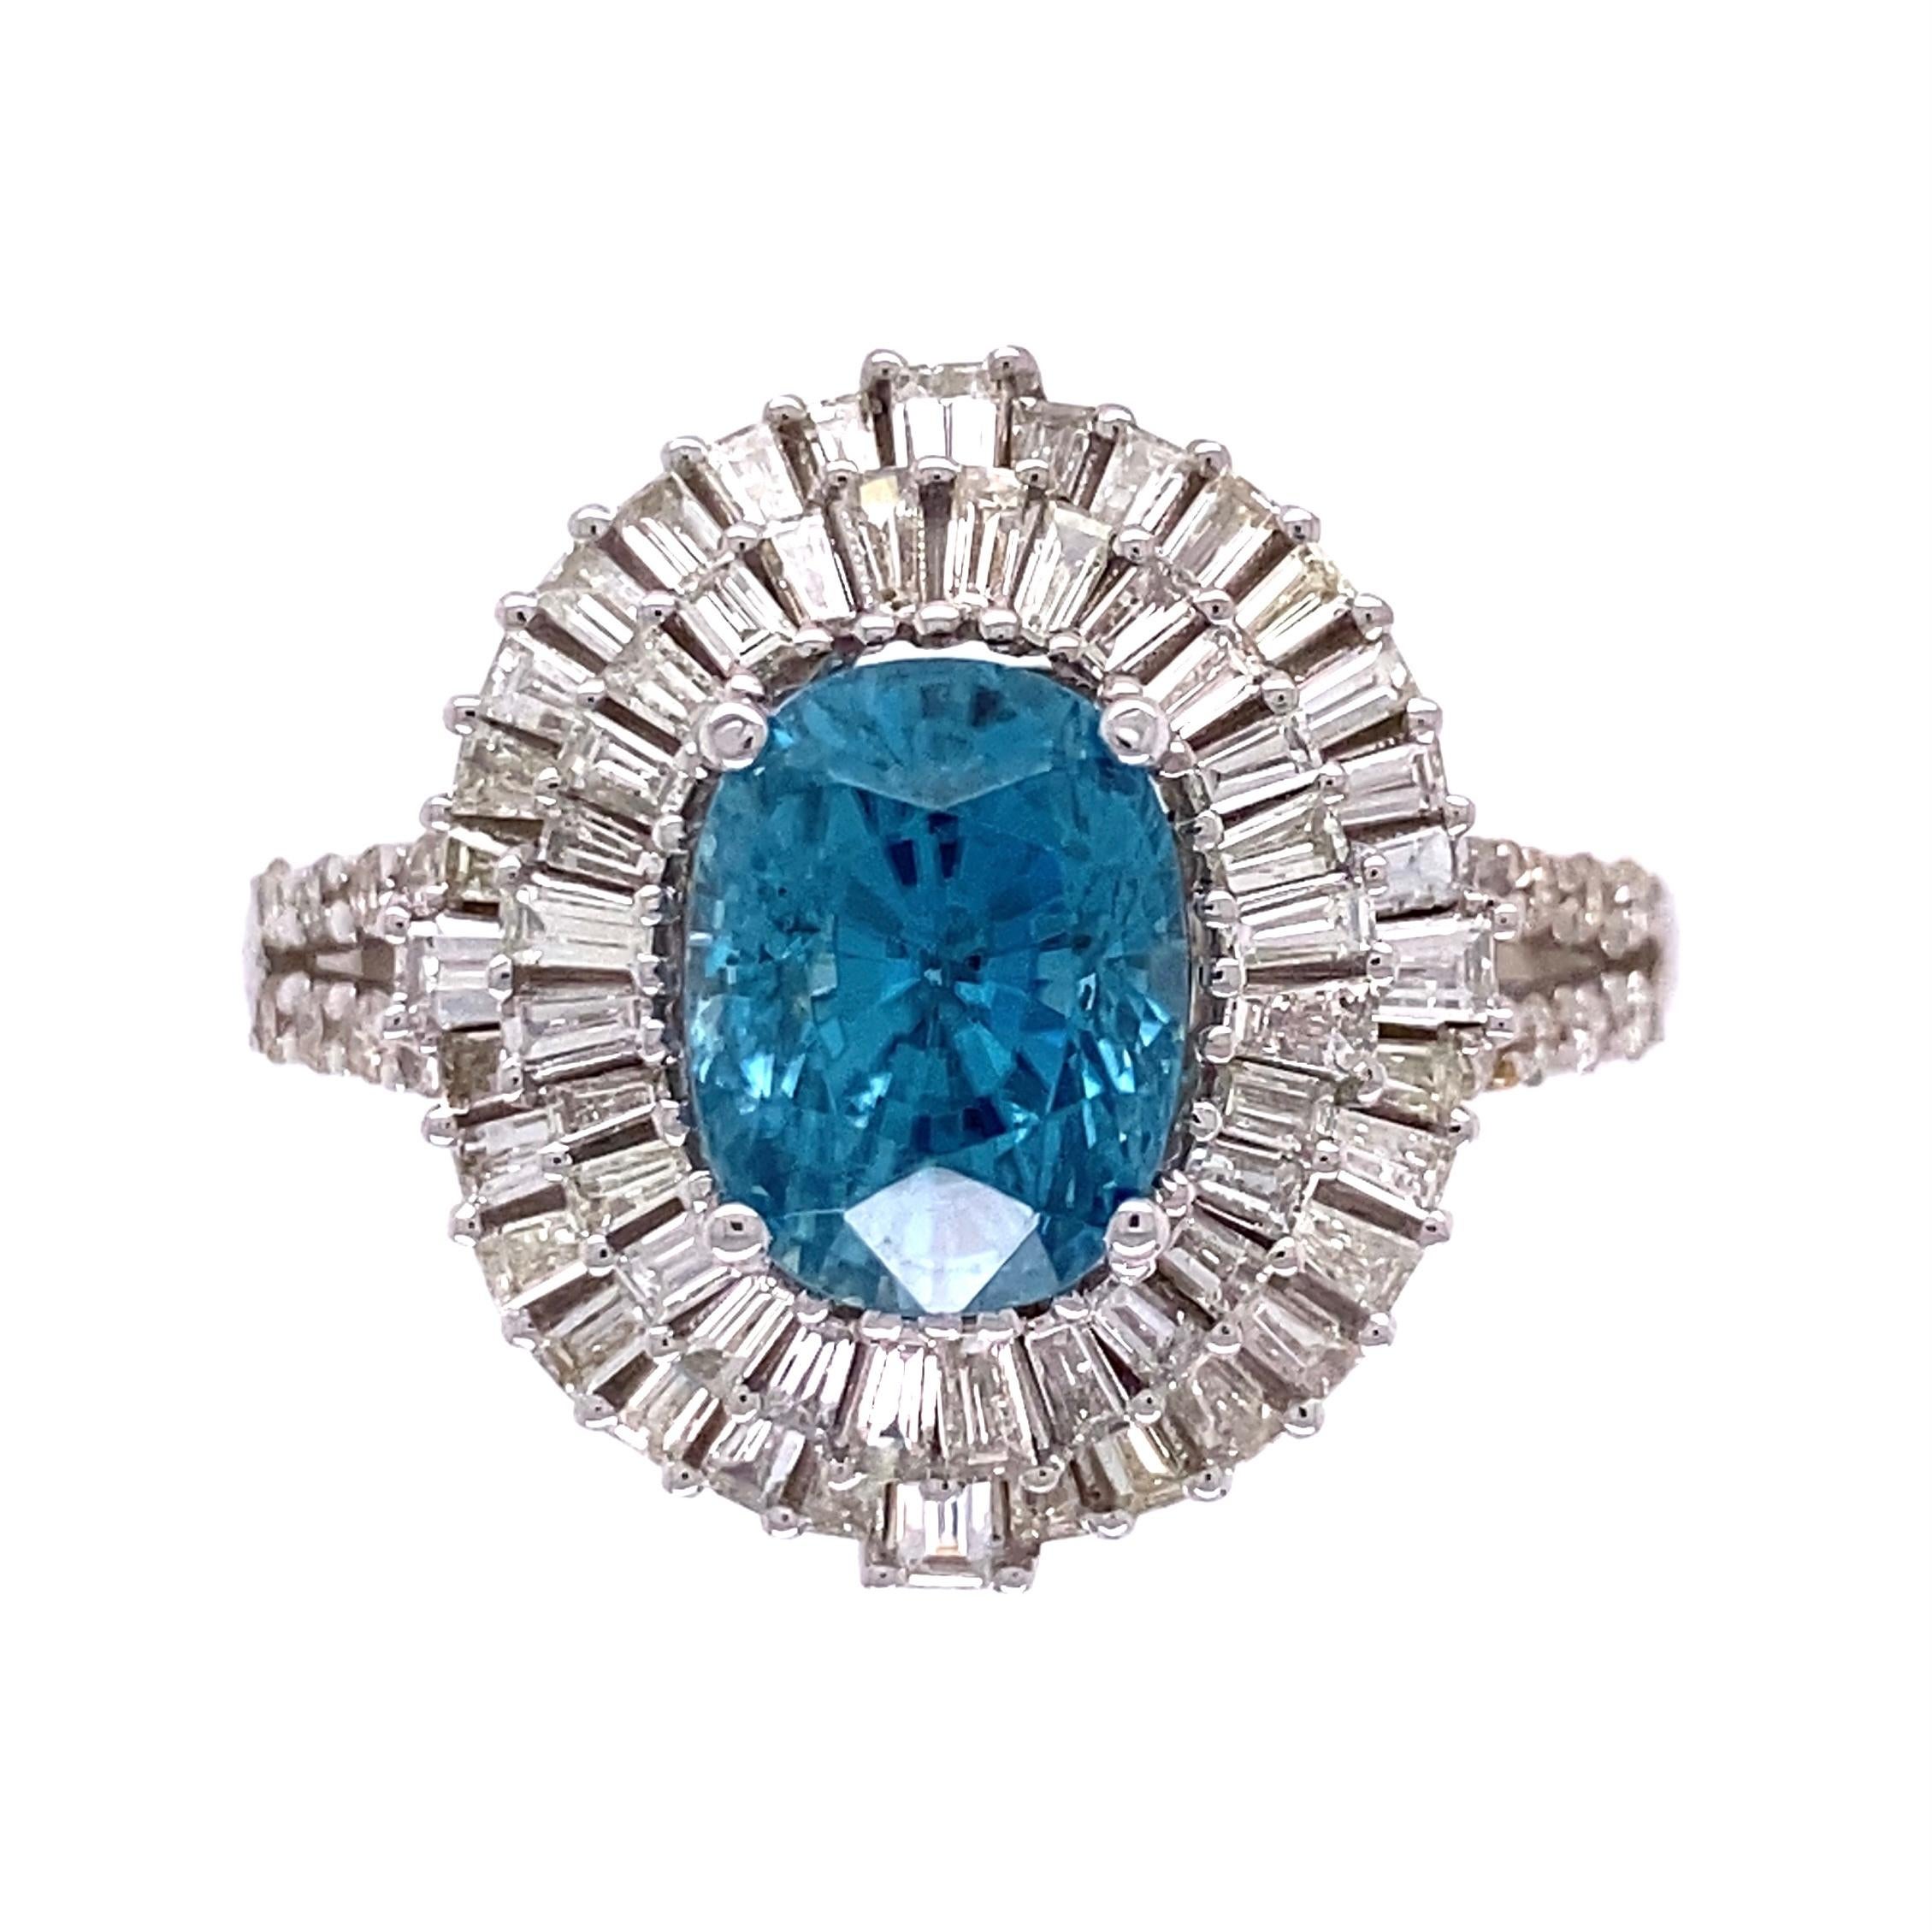 5.24 Carat Blue Zircon and Diamond Gold Cocktail Ring Estate Fine Jewelry For Sale 2